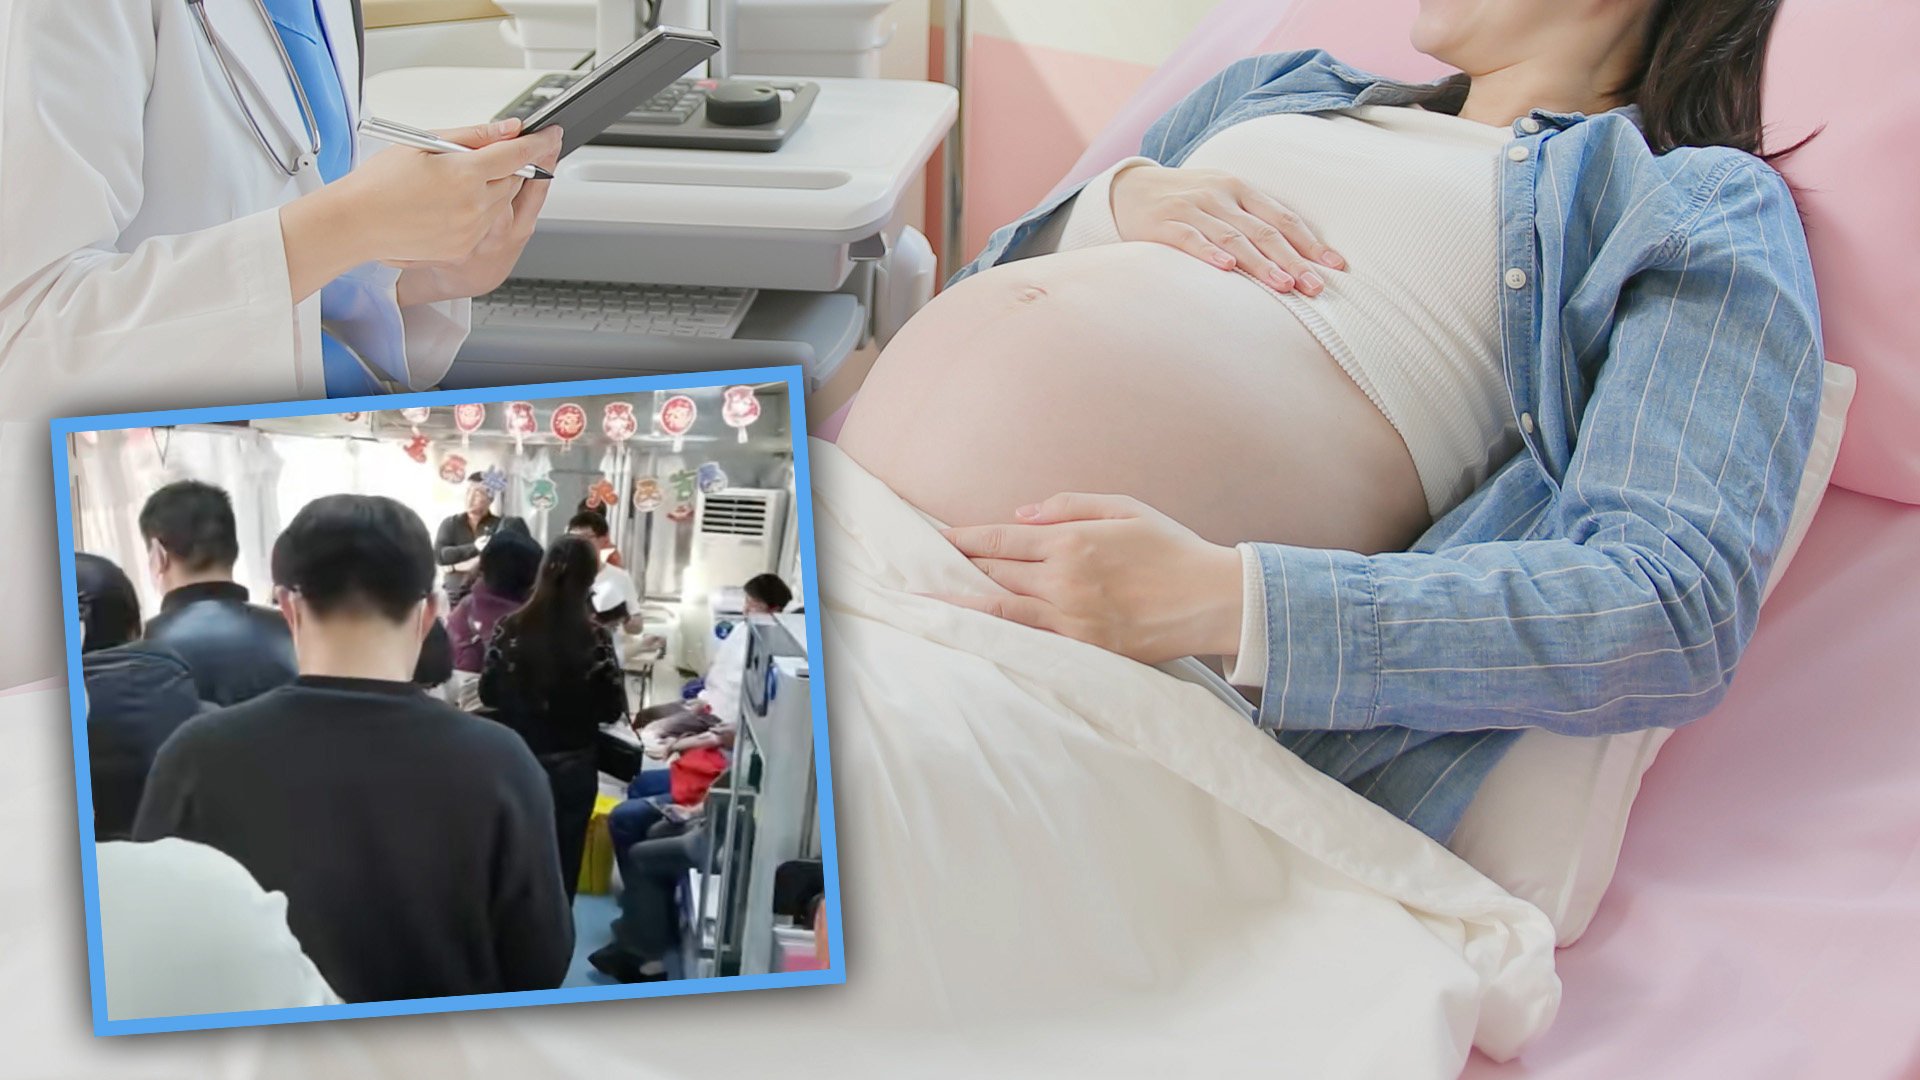 A husband in China has praised the “warmth of strangers” after hundreds of people queued up to give blood to save the life of his wife after she suffered complications while giving birth. Photo: SCMP composite/Shutterstock/Douyin